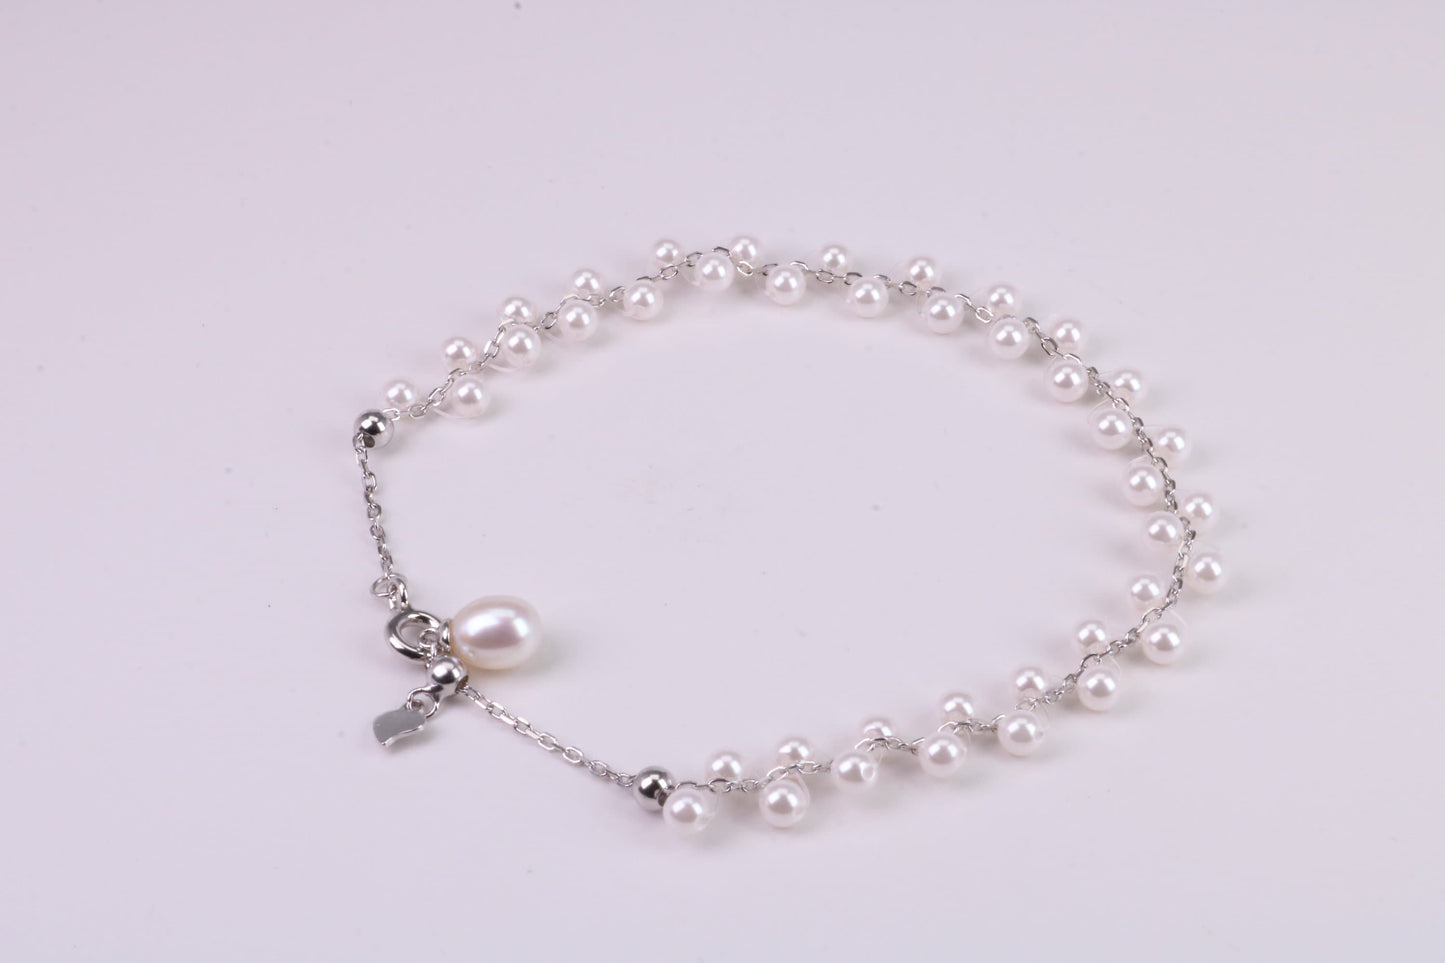 Natural 7.50 inches Long x 7 mm Wide Pearl Bracelet, made from Sterling Silver